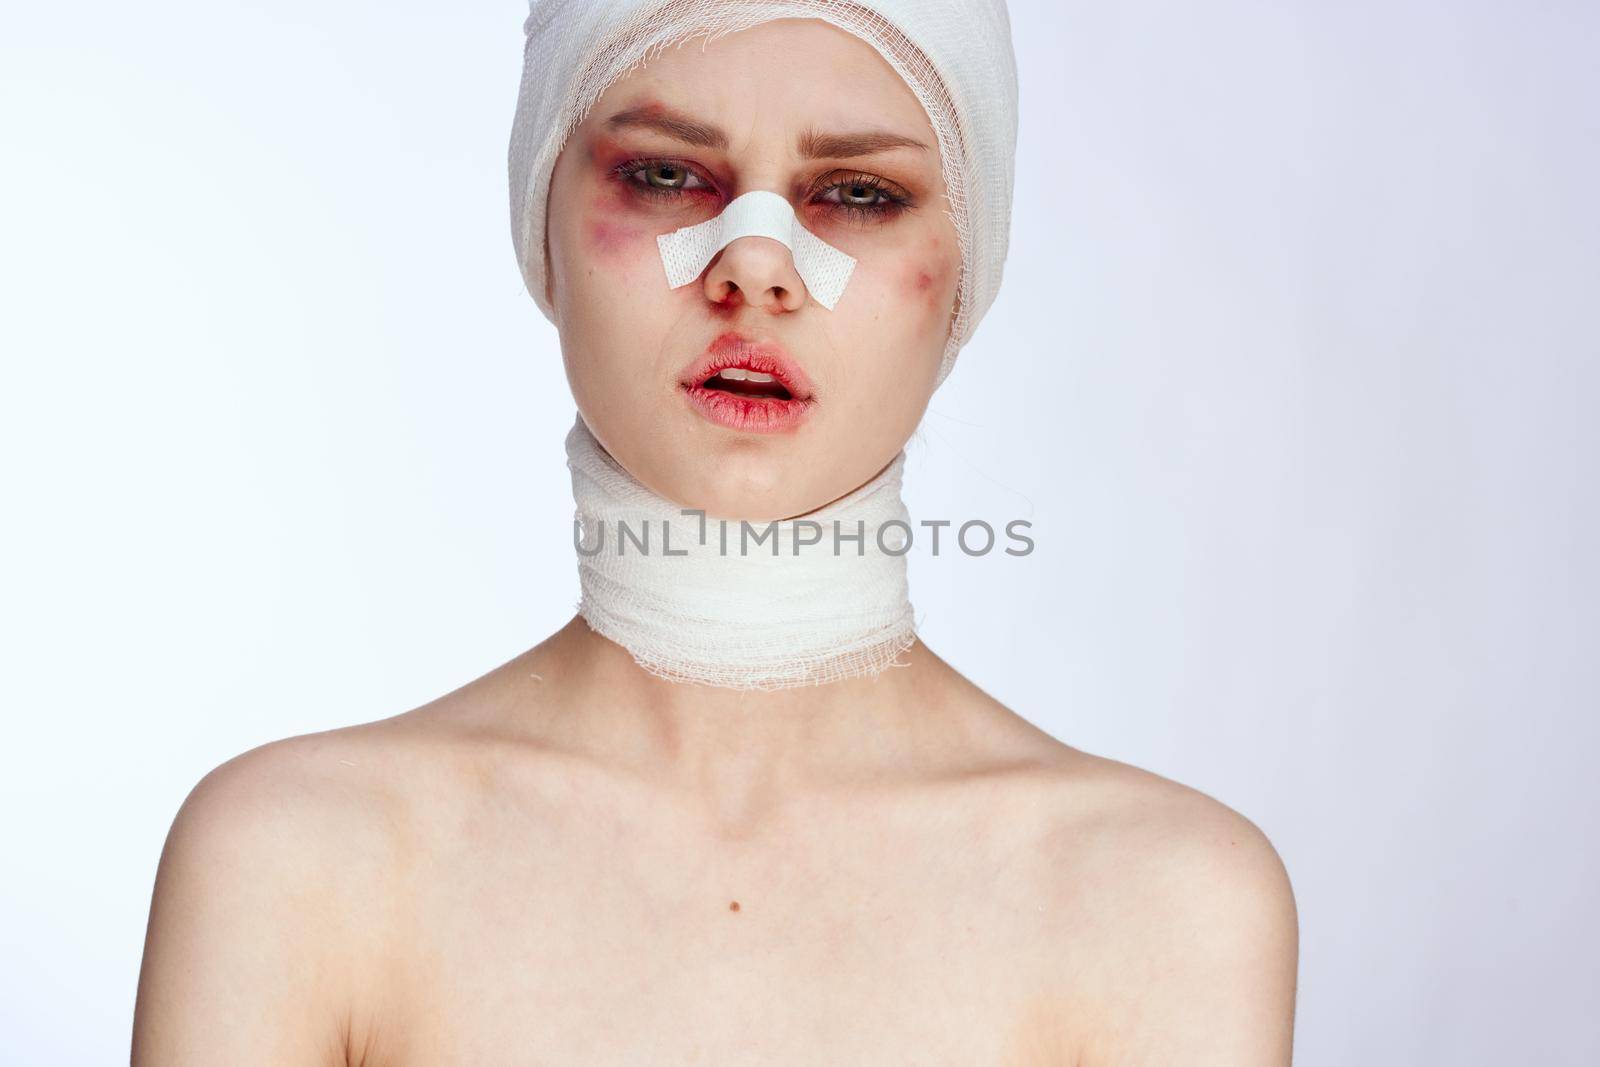 a person plastic surgery operation bare shoulders light background. High quality photo